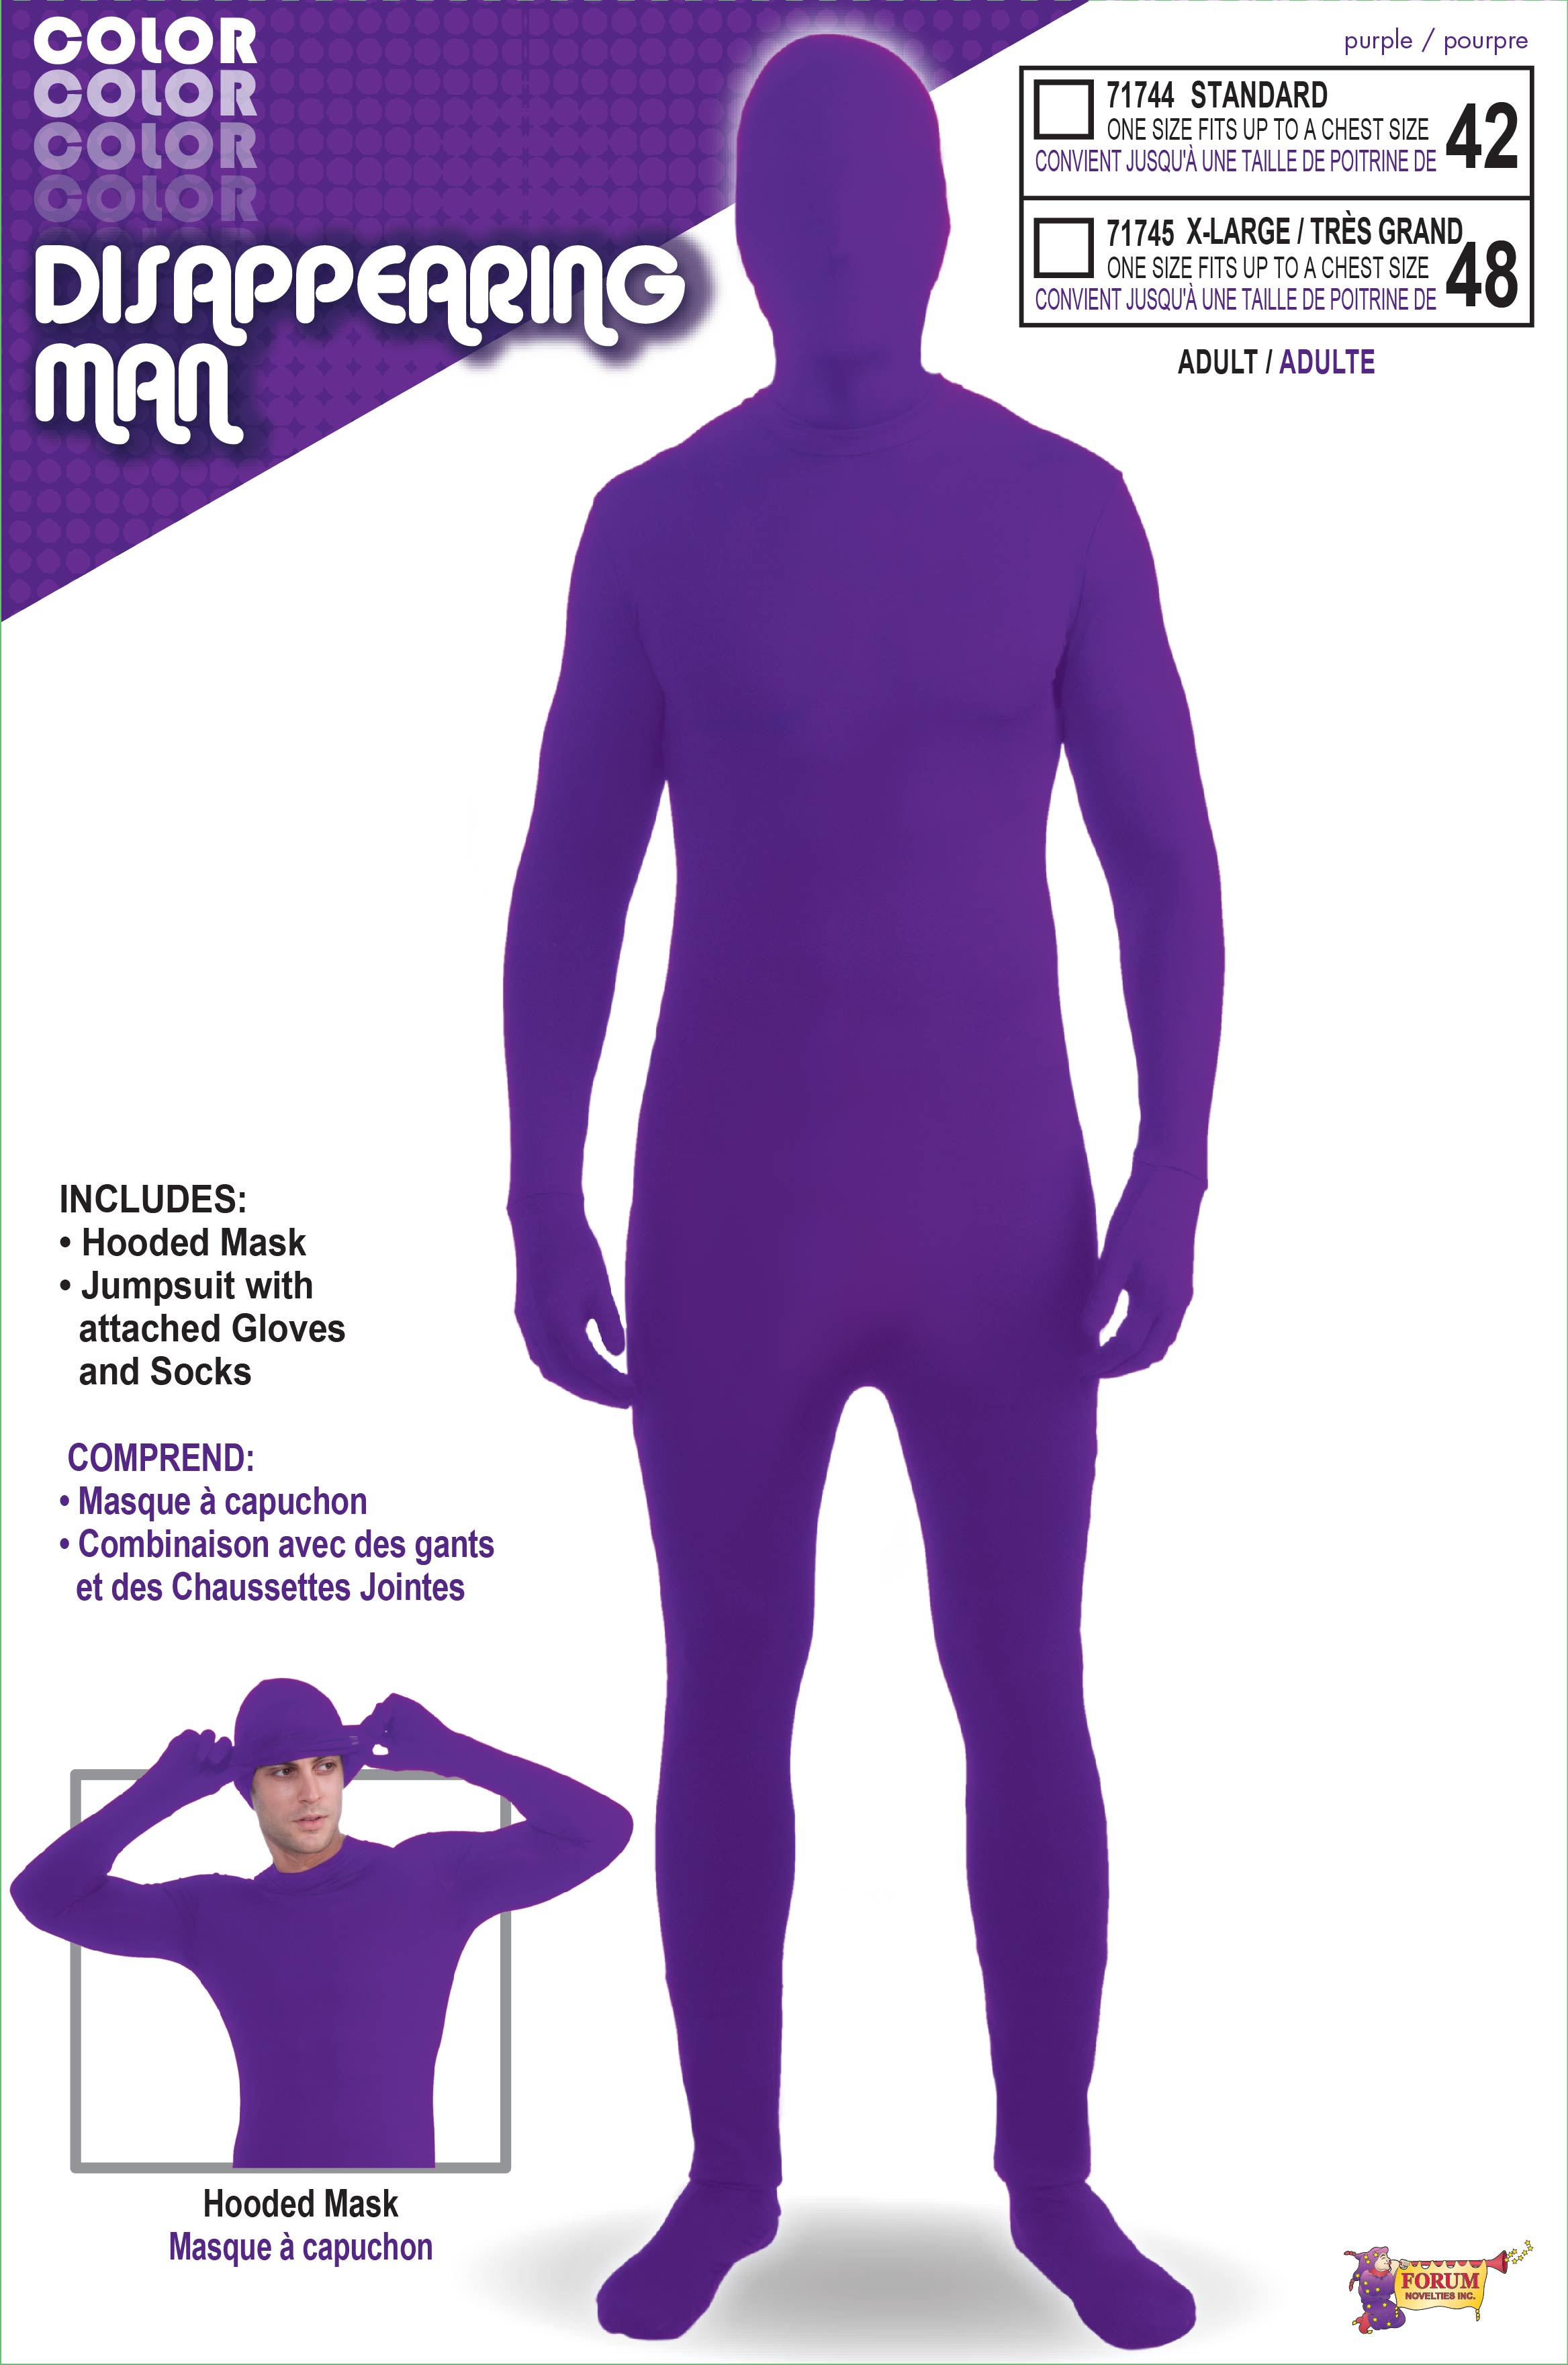 Black 2nd Skin Disappearing Full Body Suit Jumpsuit Zentai Costume 